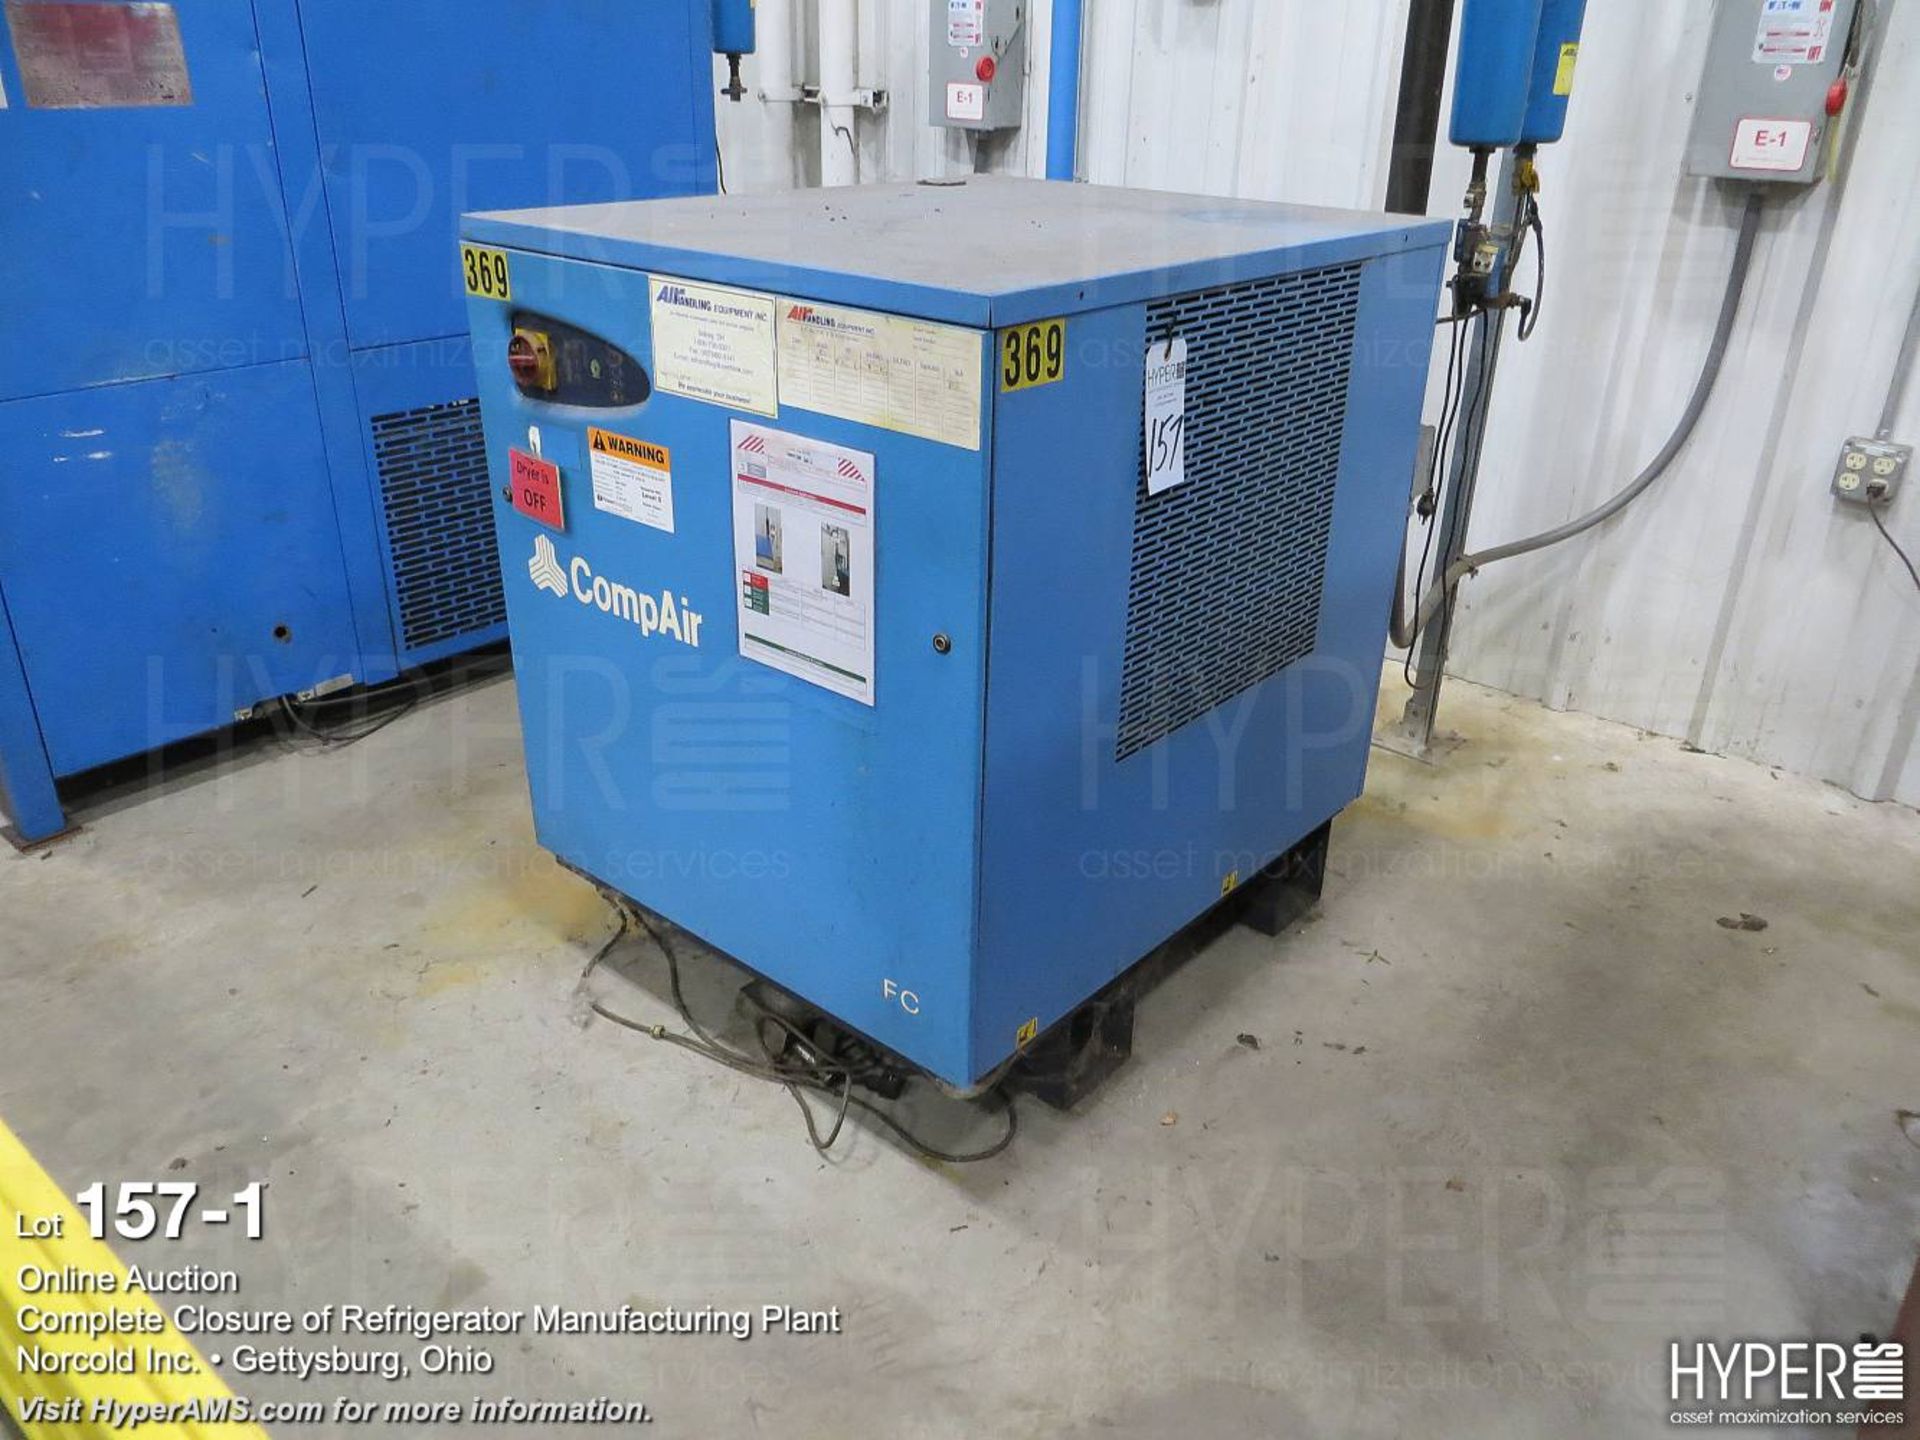 CompAir refrigerated air dryer FC0425 - Image 2 of 4